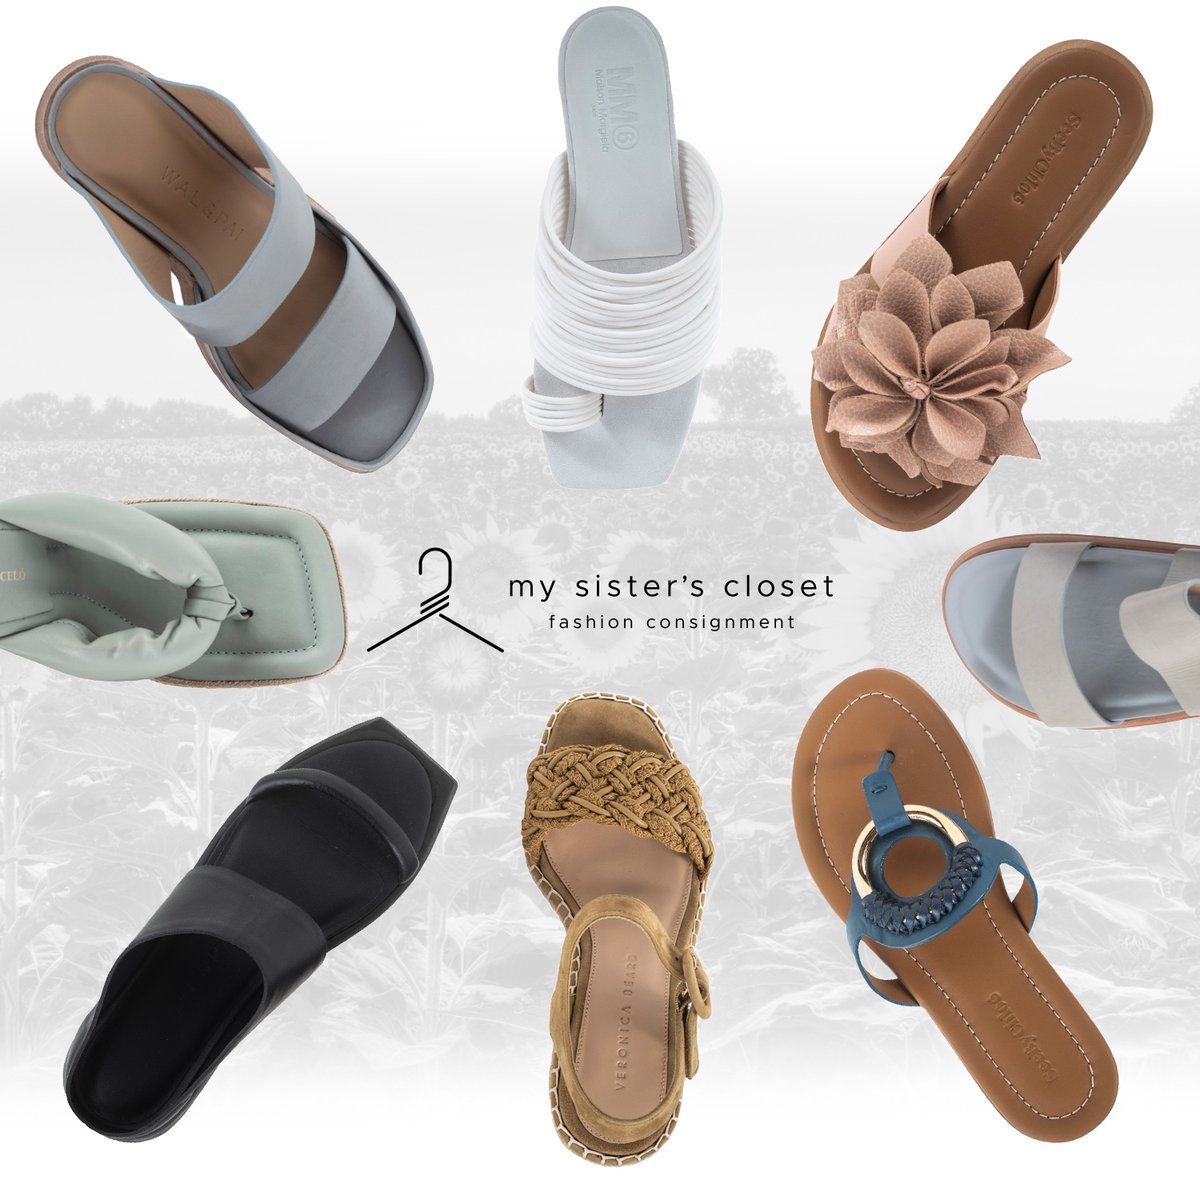 Get ready for sandal season at our spring unveiling on February 4th!

Shop online at the link in our bio.

#spring2023 #springunveiling #spring #shoes #sandals #designershoes #designerclothing #womensclothing #designerjacket #consign #mysisterscloset #designer #consignment